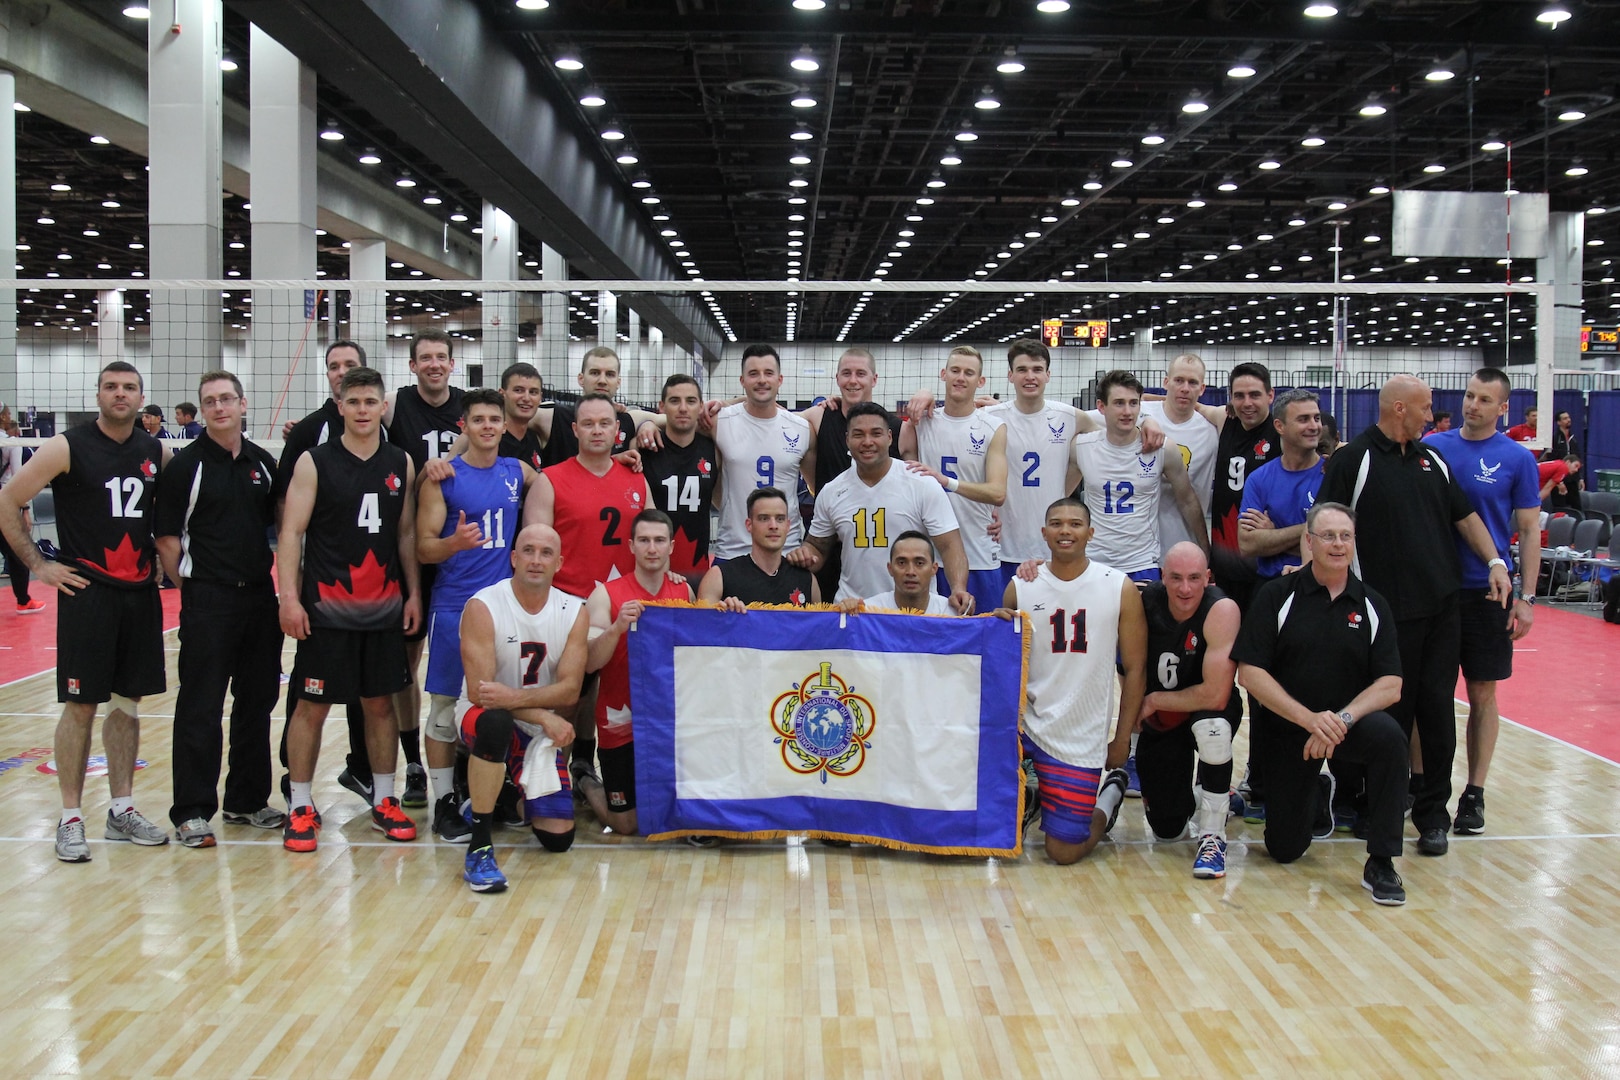 Service members from the Army, Navy and Air Force men's volleyball teams pose with Team Canada after a friendly international Conseil International du Sport Militaire (CISM) exhibition match during the 2015 Armed Forces Volleyball Championship held in conjunction with the USA Volleyball National Championship at the COBO Center in Detroit, Mich. 22-24.